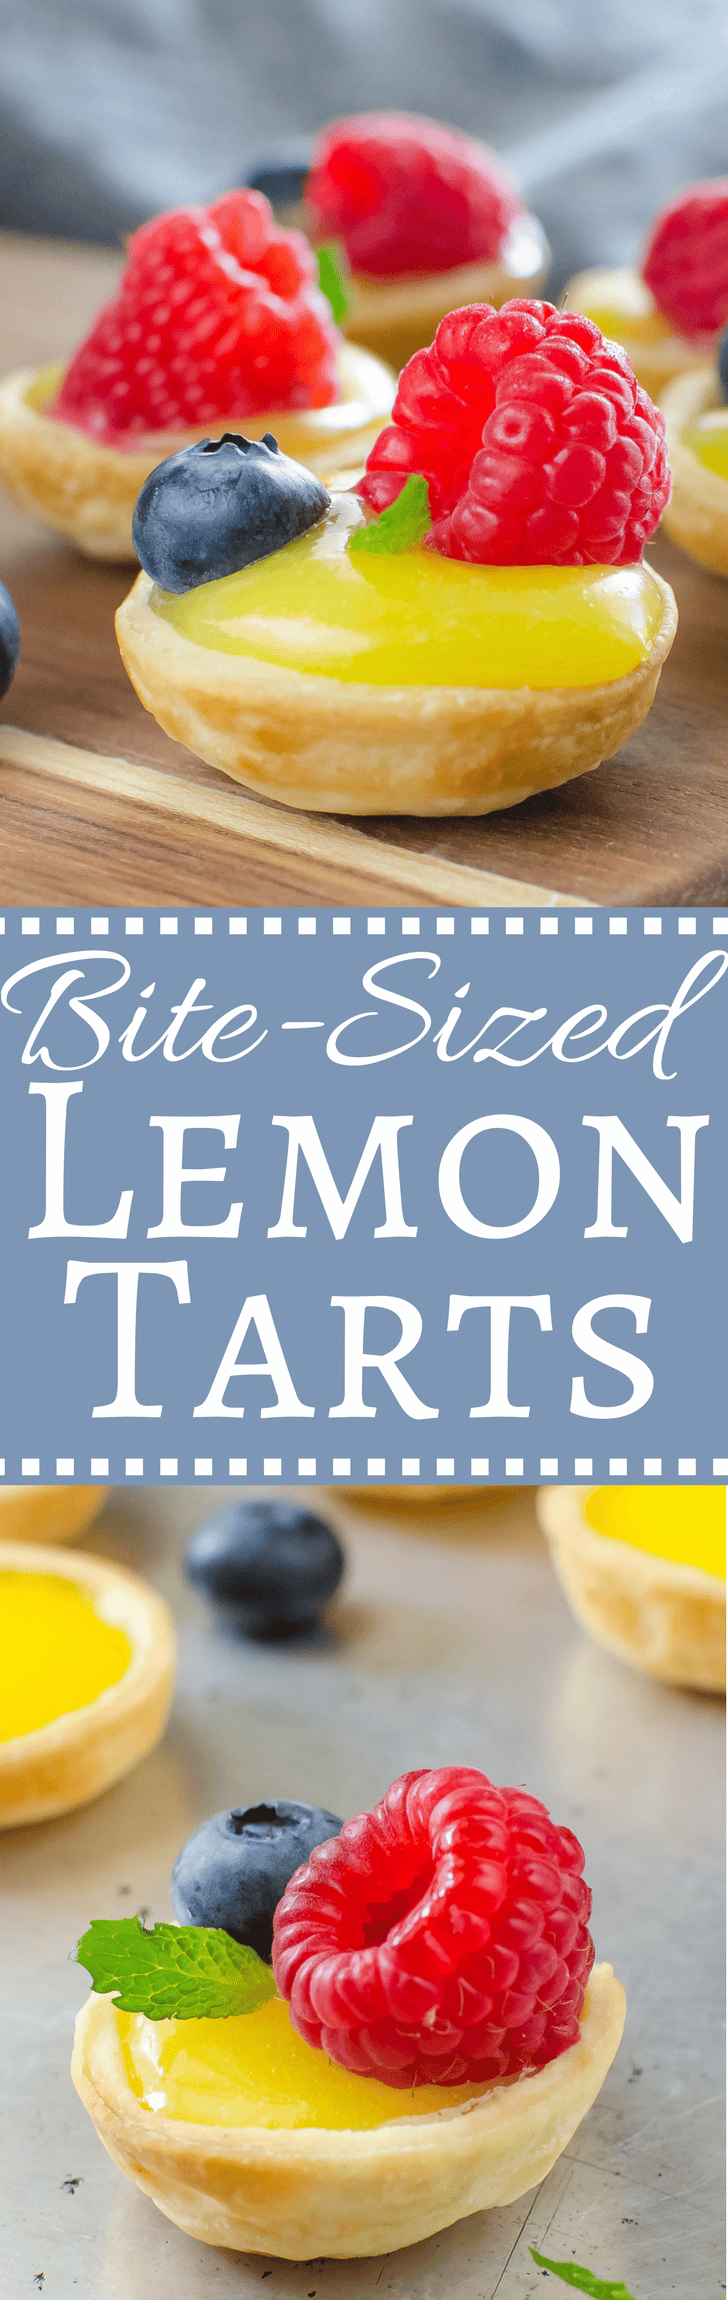 Perfect for a bridal or baby shower, this mini lemon tart recipe is so easy to make!